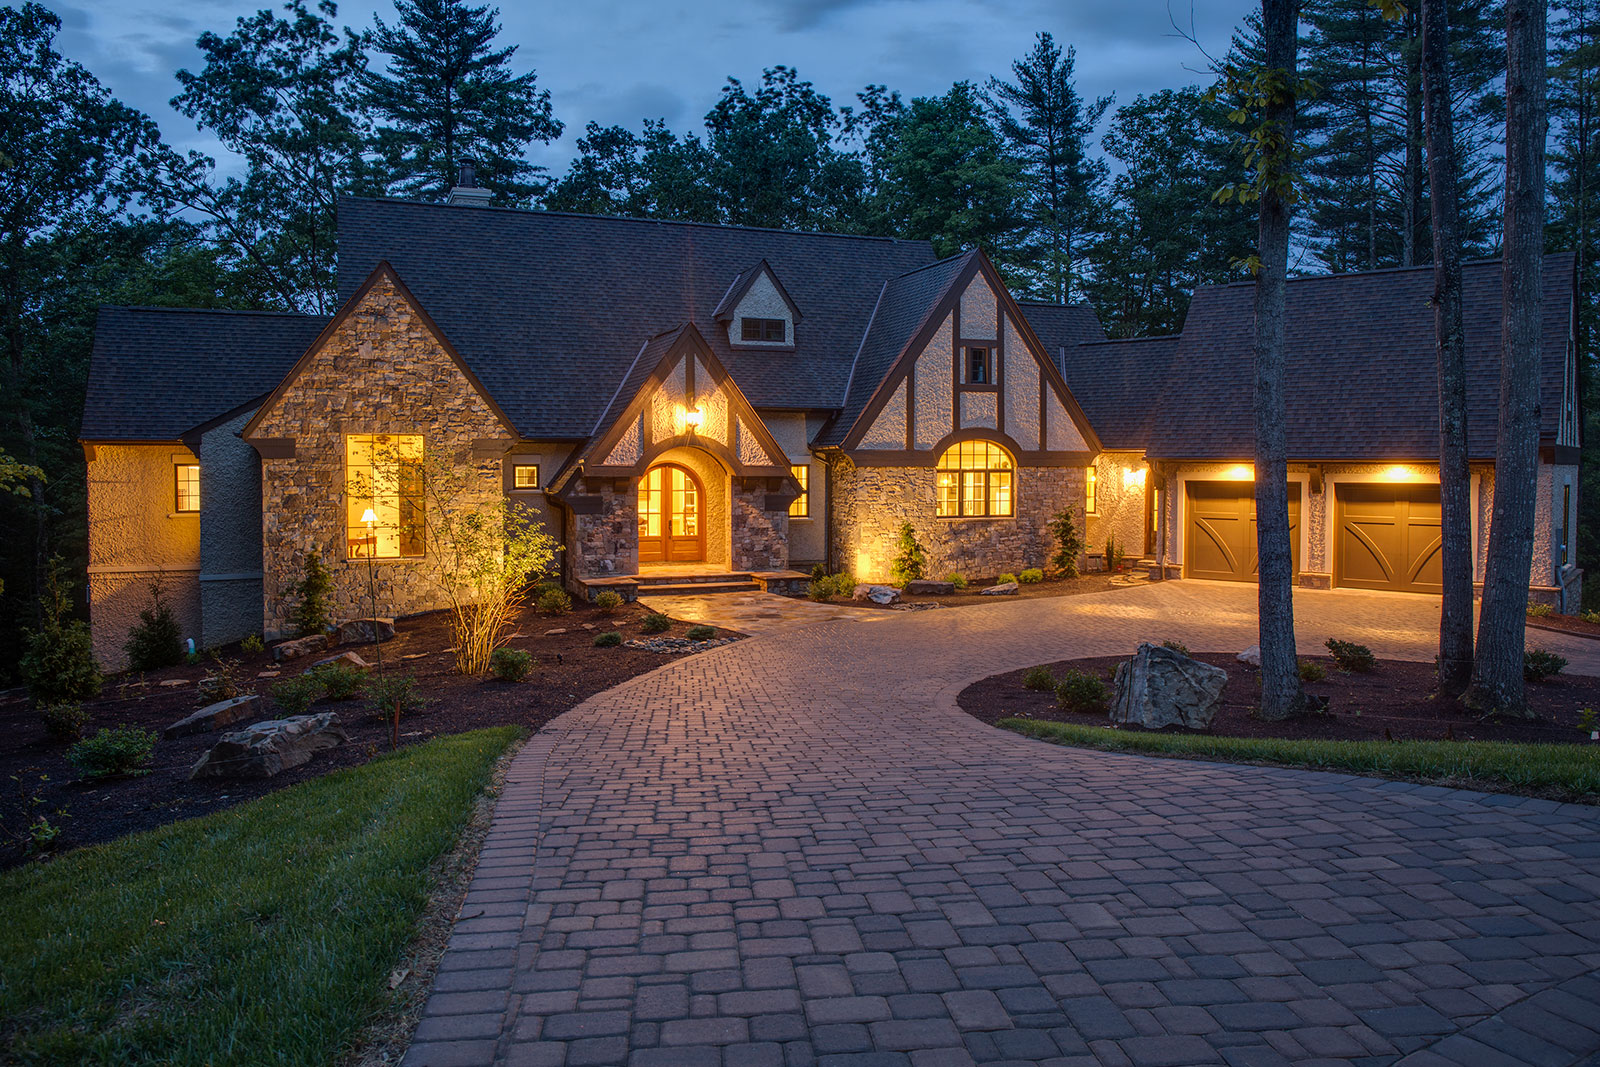 Stone and stucco custom-built Tudor mansion on a wooded lot at twilight.